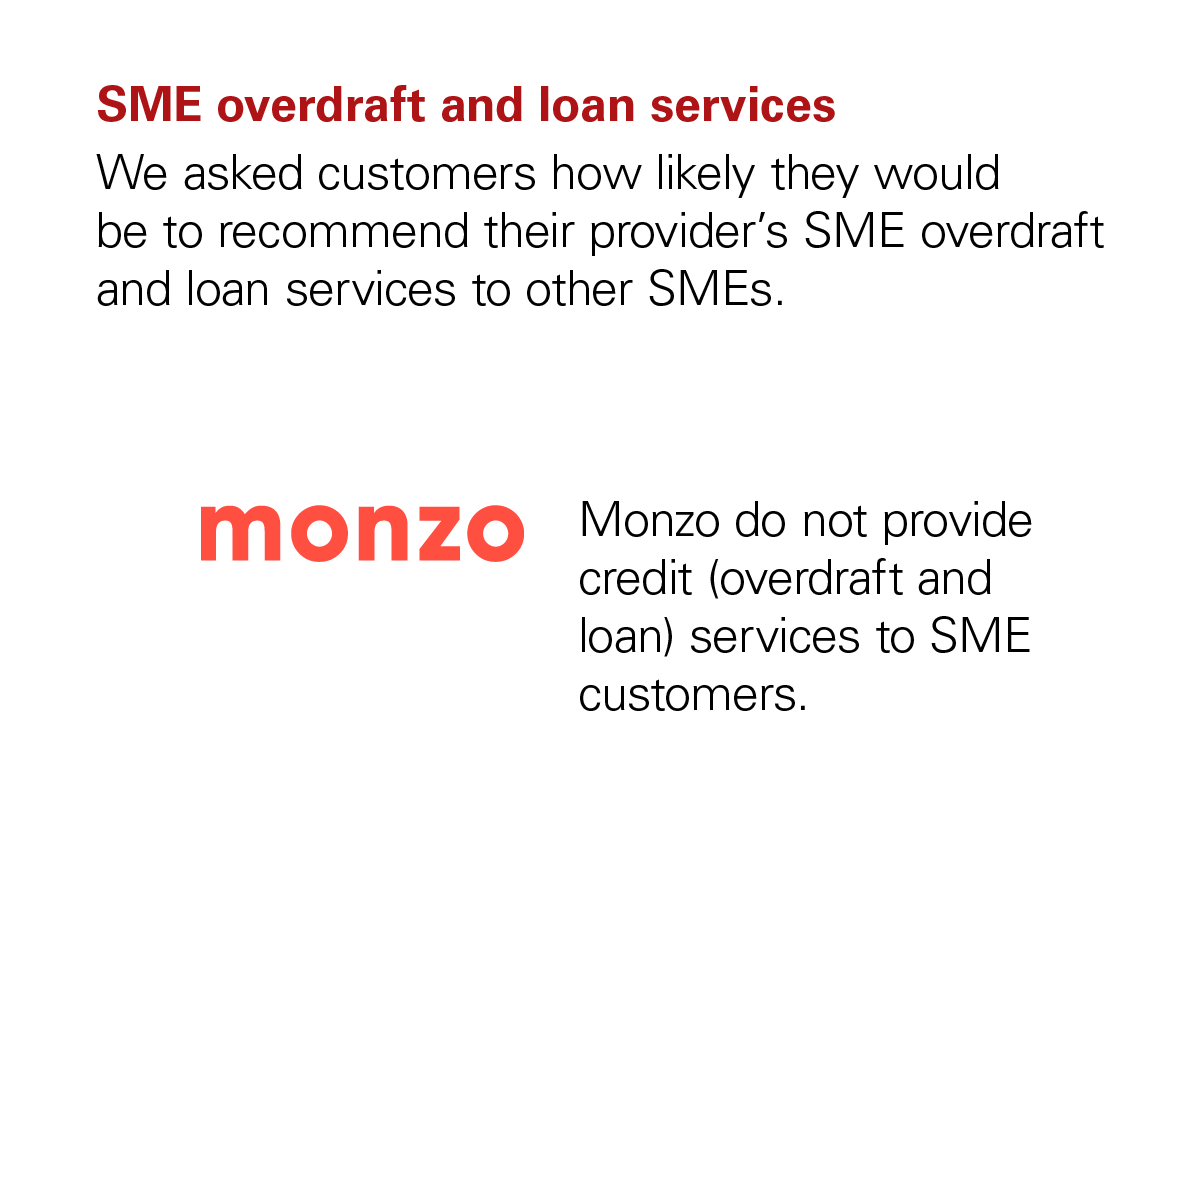 Graph showing that Monzo didn't receive a score from the CMA for the SME Overdraft and Loan Services category because Monzo doesn't provide credit services to SME customers.